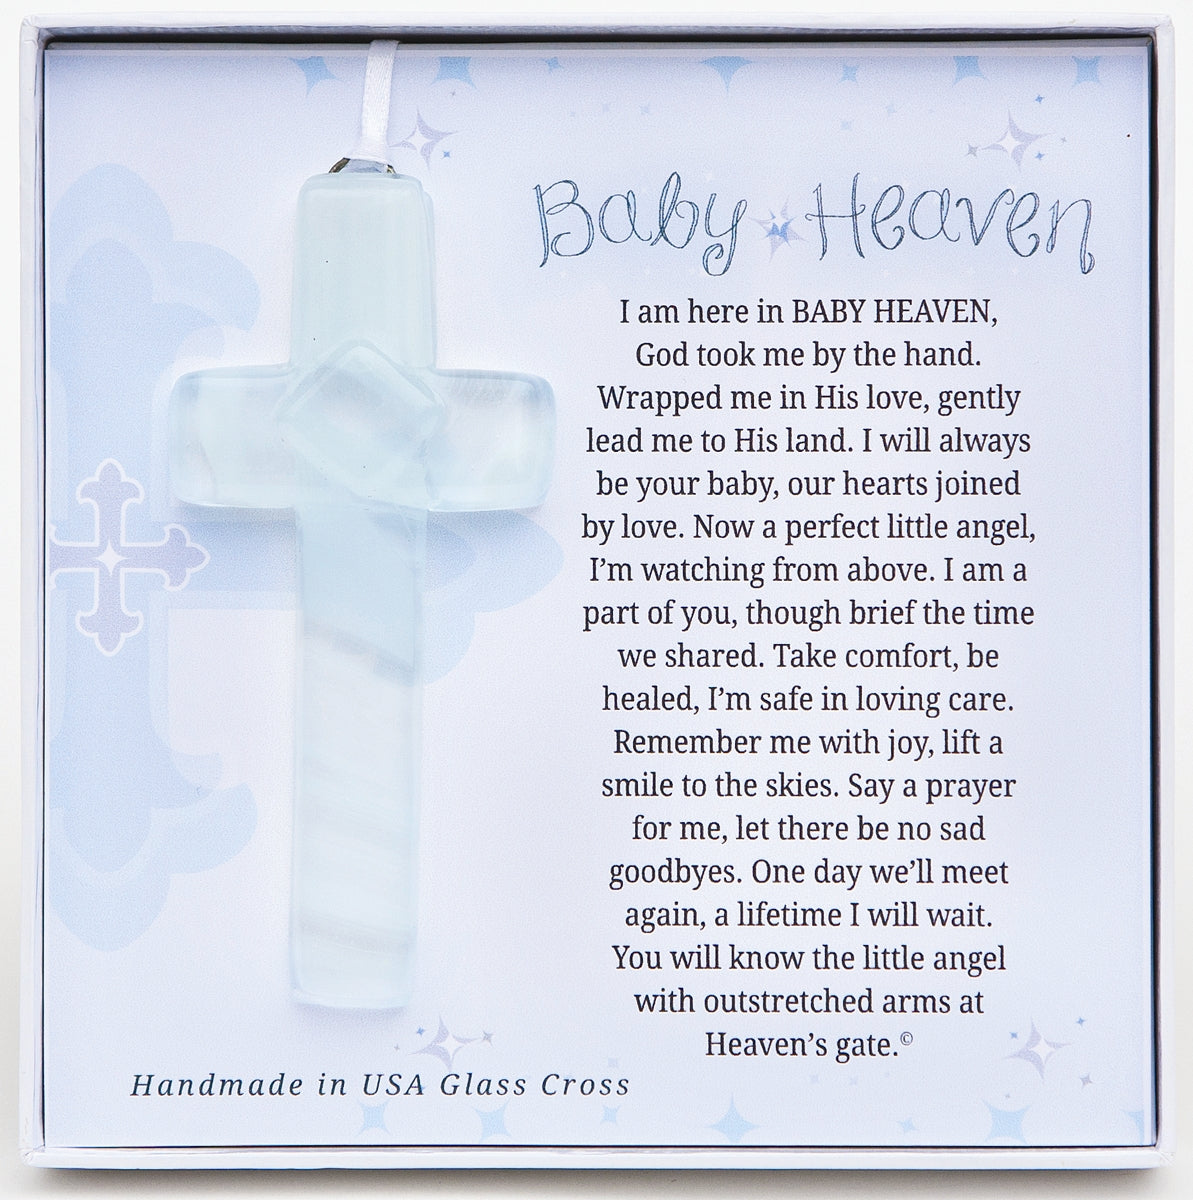 4" handmade clear hanging glass cross with Baby Heaven poem printed on cardstock in white gift box with clear lid.